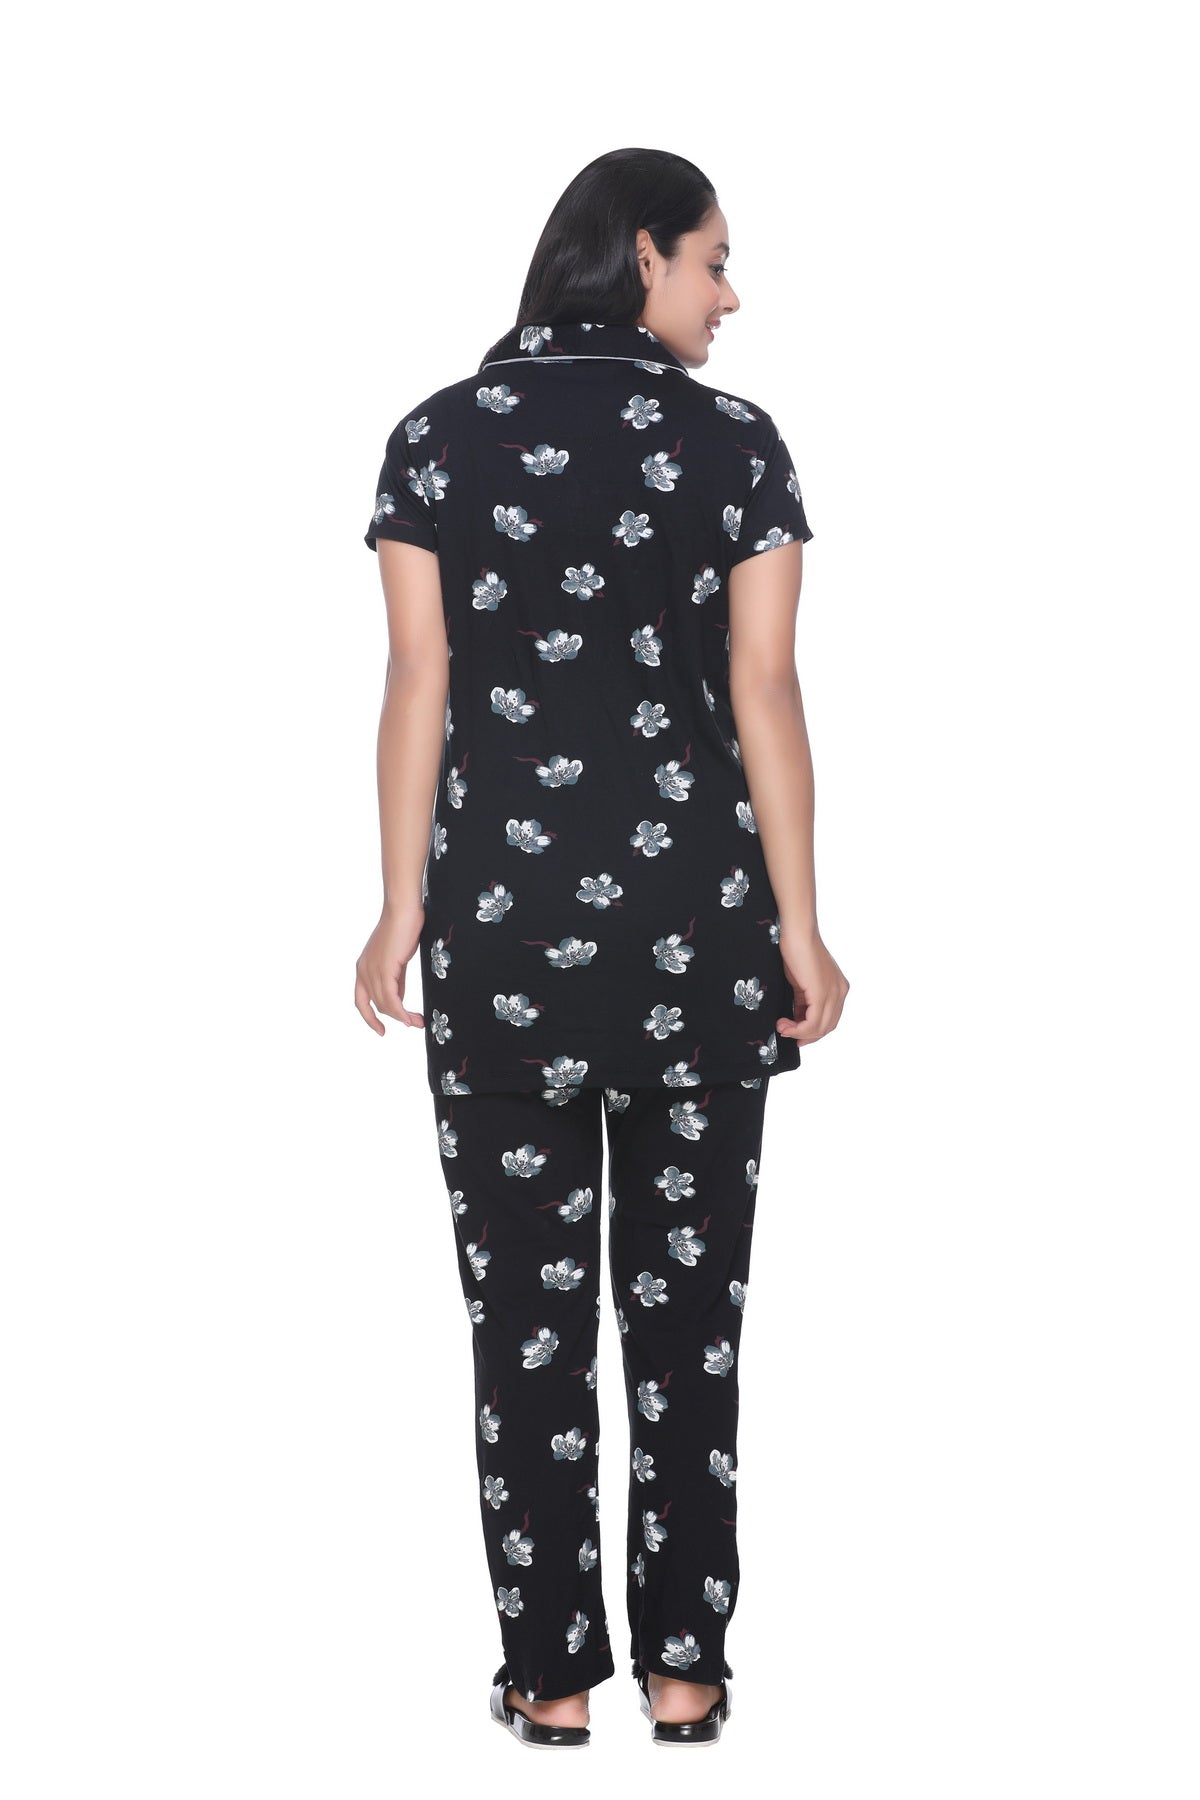 CUPID All Over Print Super Soft Cotton Night Suit ( Black) freeshipping - Cupid Clothings